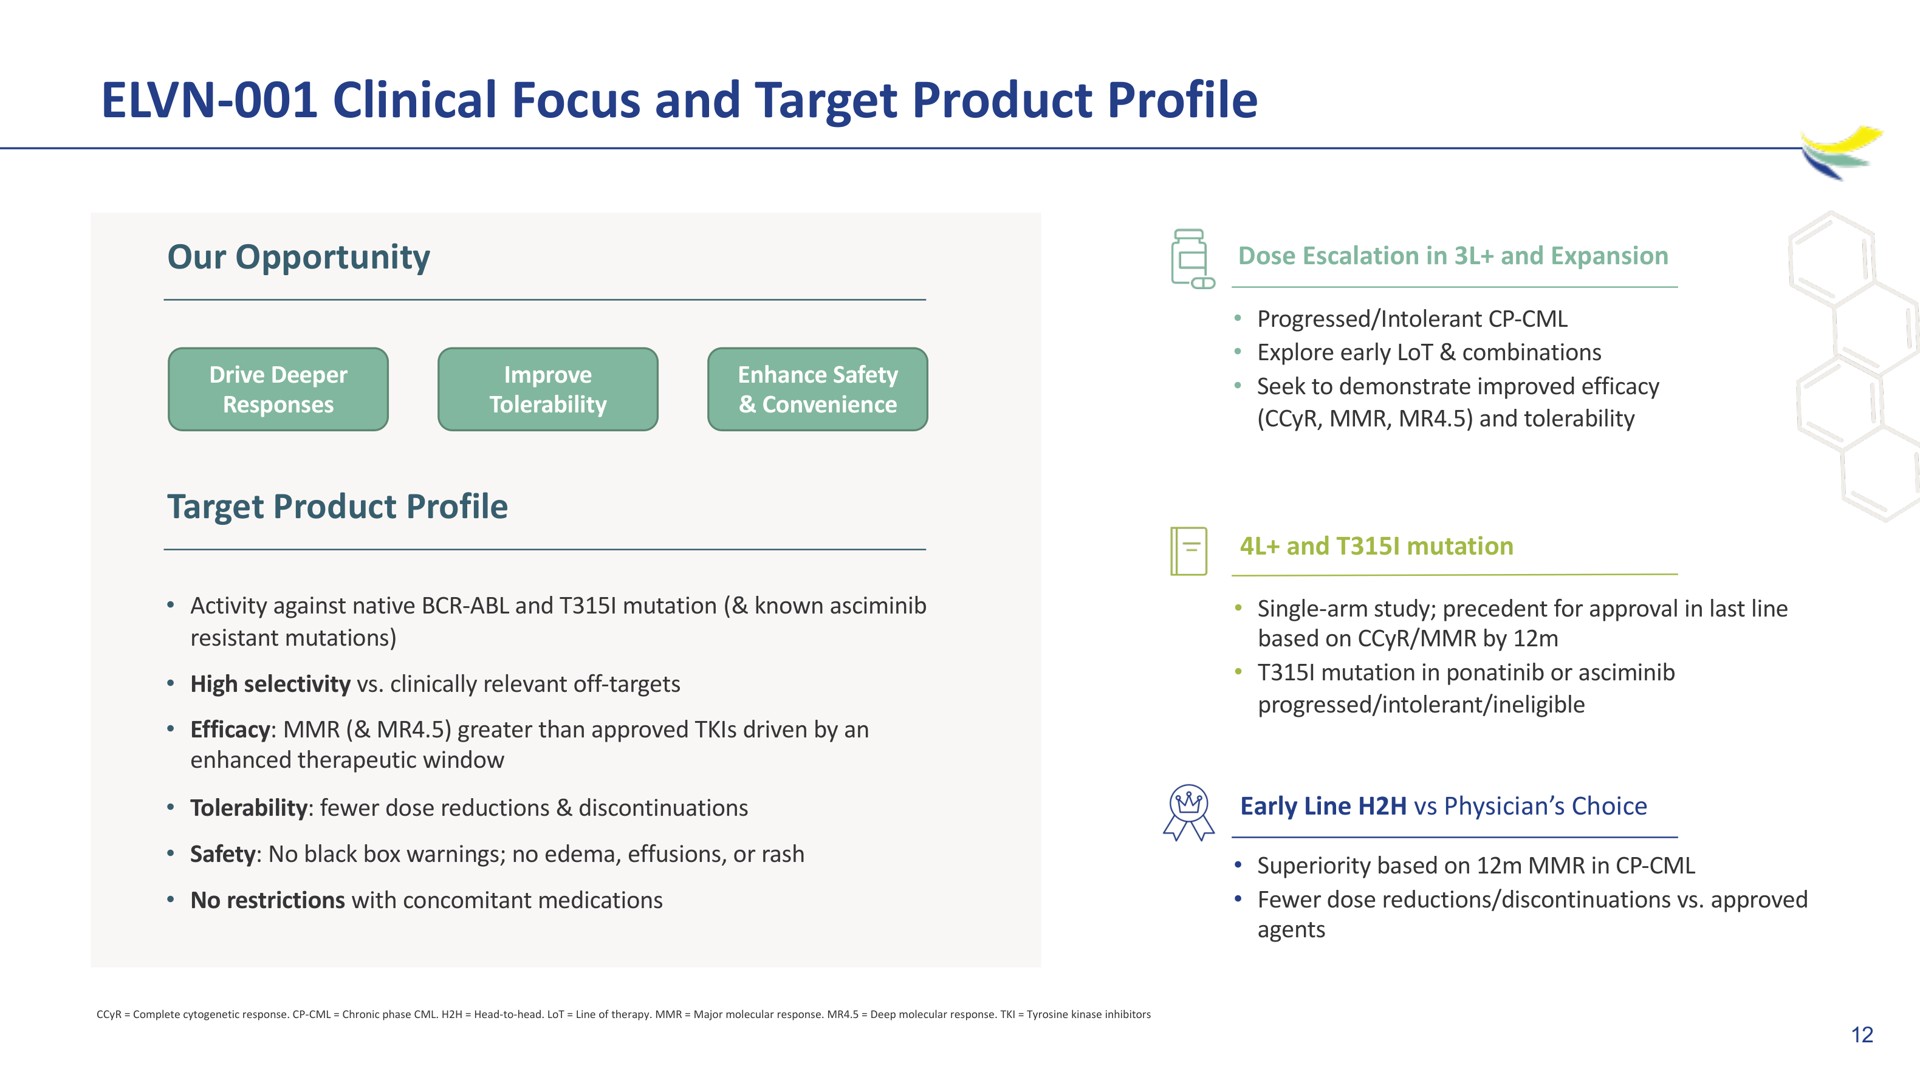 clinical focus and target product profile | Imara